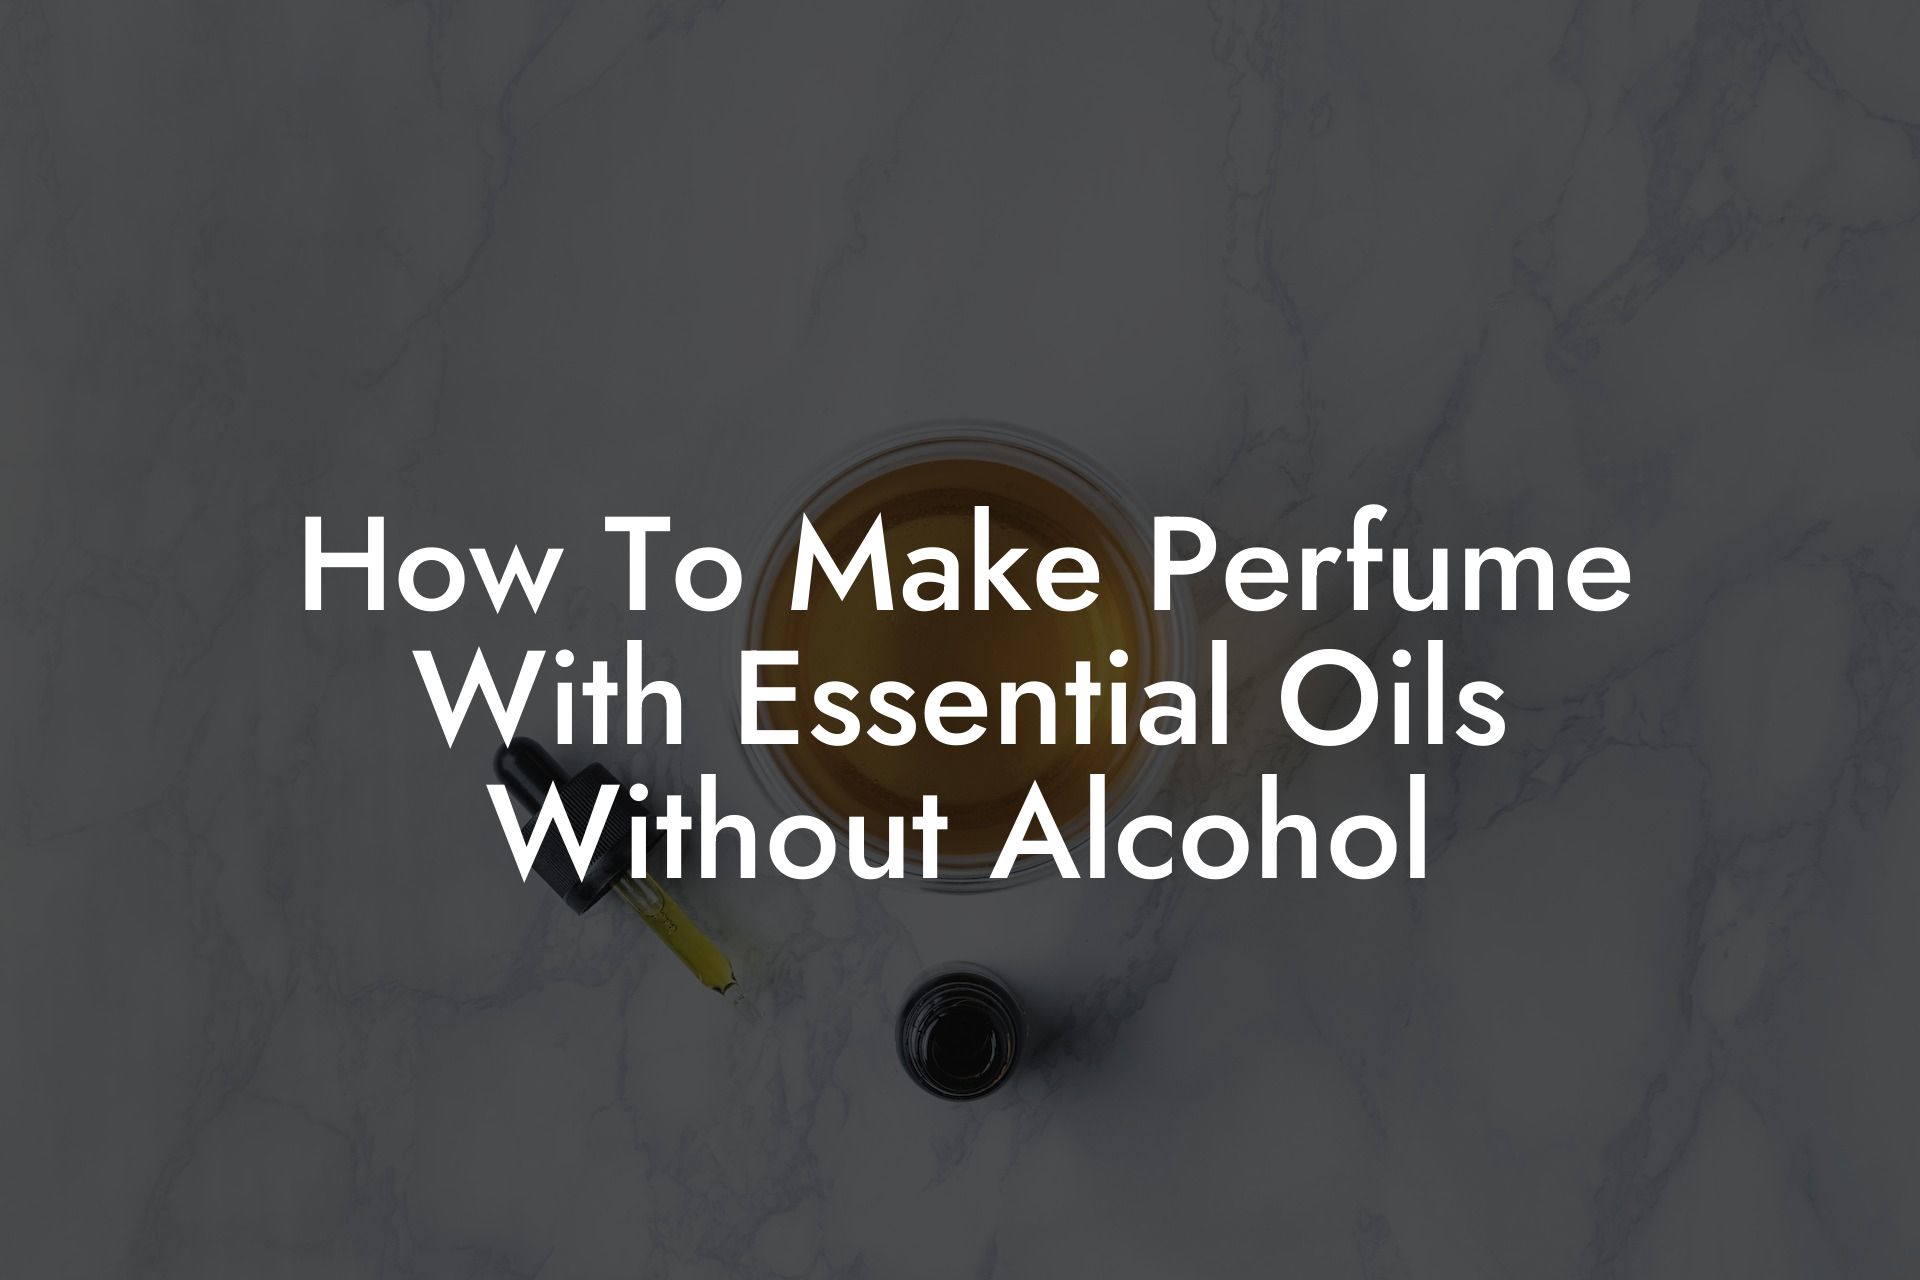 How To Make Perfume With Essential Oils Without Alcohol